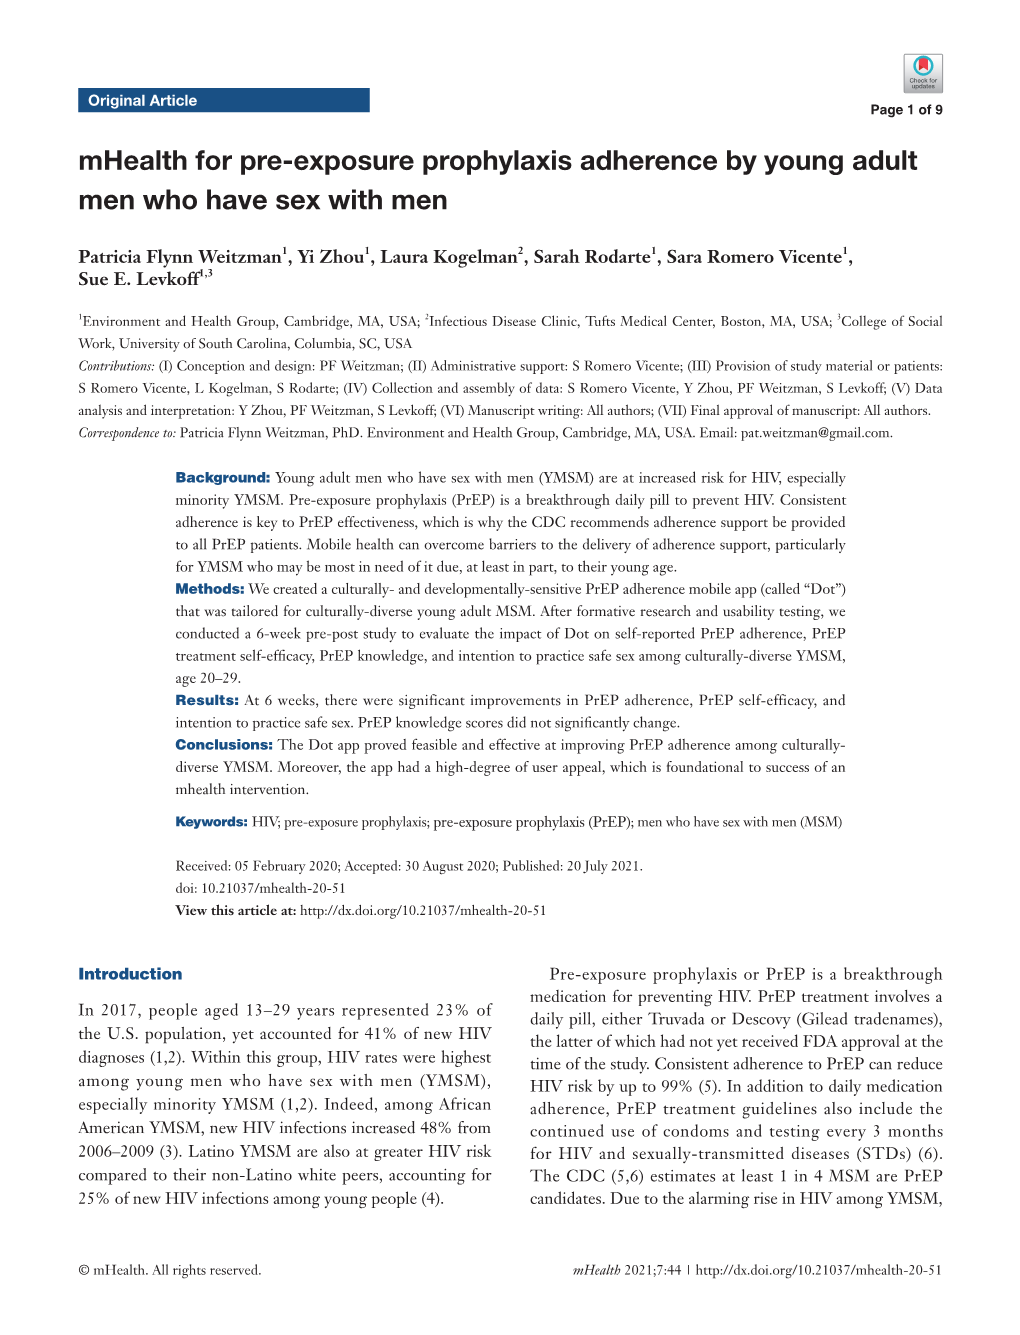 Mhealth for Pre-Exposure Prophylaxis Adherence by Young Adult Men Who Have Sex with Men